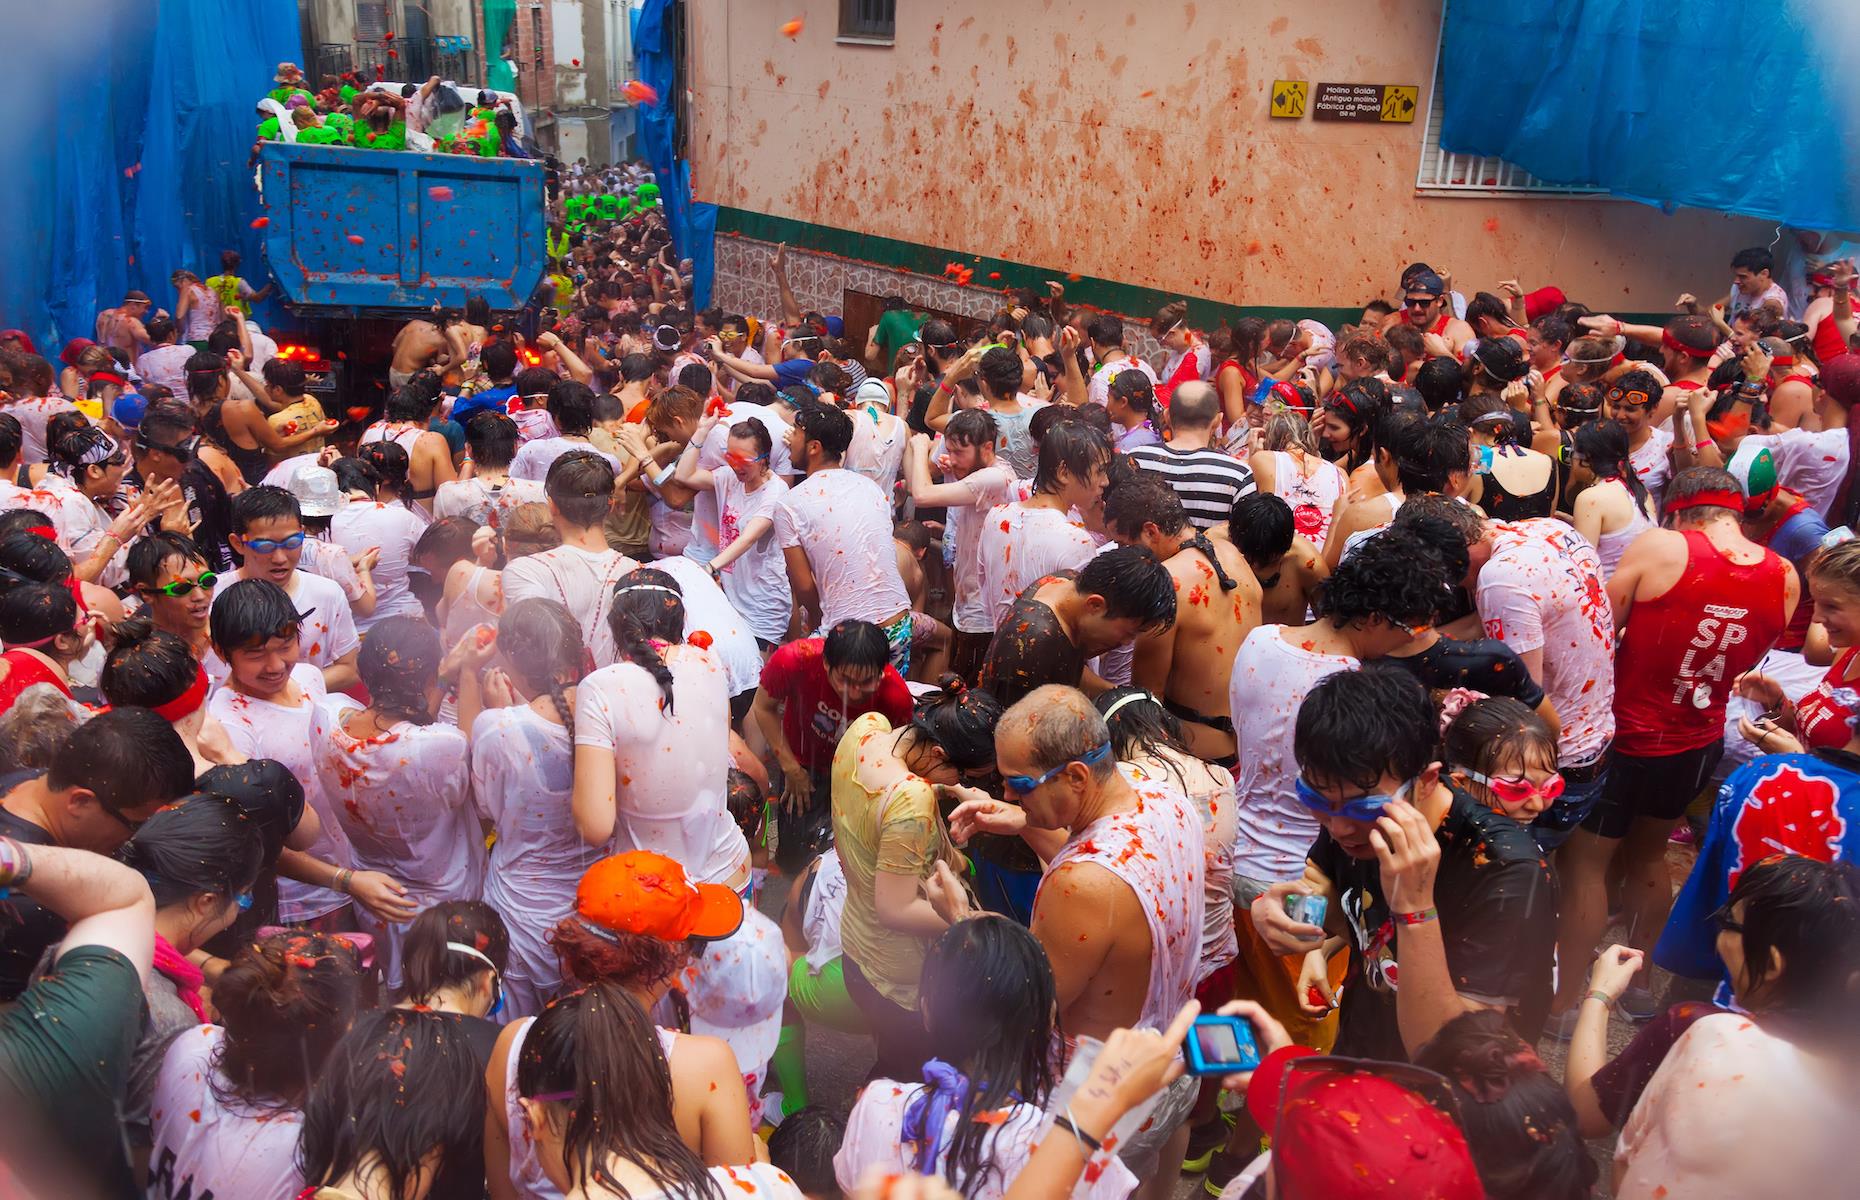 <p>If you hate food waste, look away now. Each year in Bunol, near Valencia in Spain, 20,000 people gather to lob around 150,000 kg of tomatoes at each other in the streets during La Tomatina, billed as the world's largest annual food fight. The curious festival has its origins in an innocuous tomato slinging fight that took place at a street parade in 1945 and became a tradition. The now world-famous spectacle is held on the last Wednesday of August and attracts tens of thousands of people every year.</p>